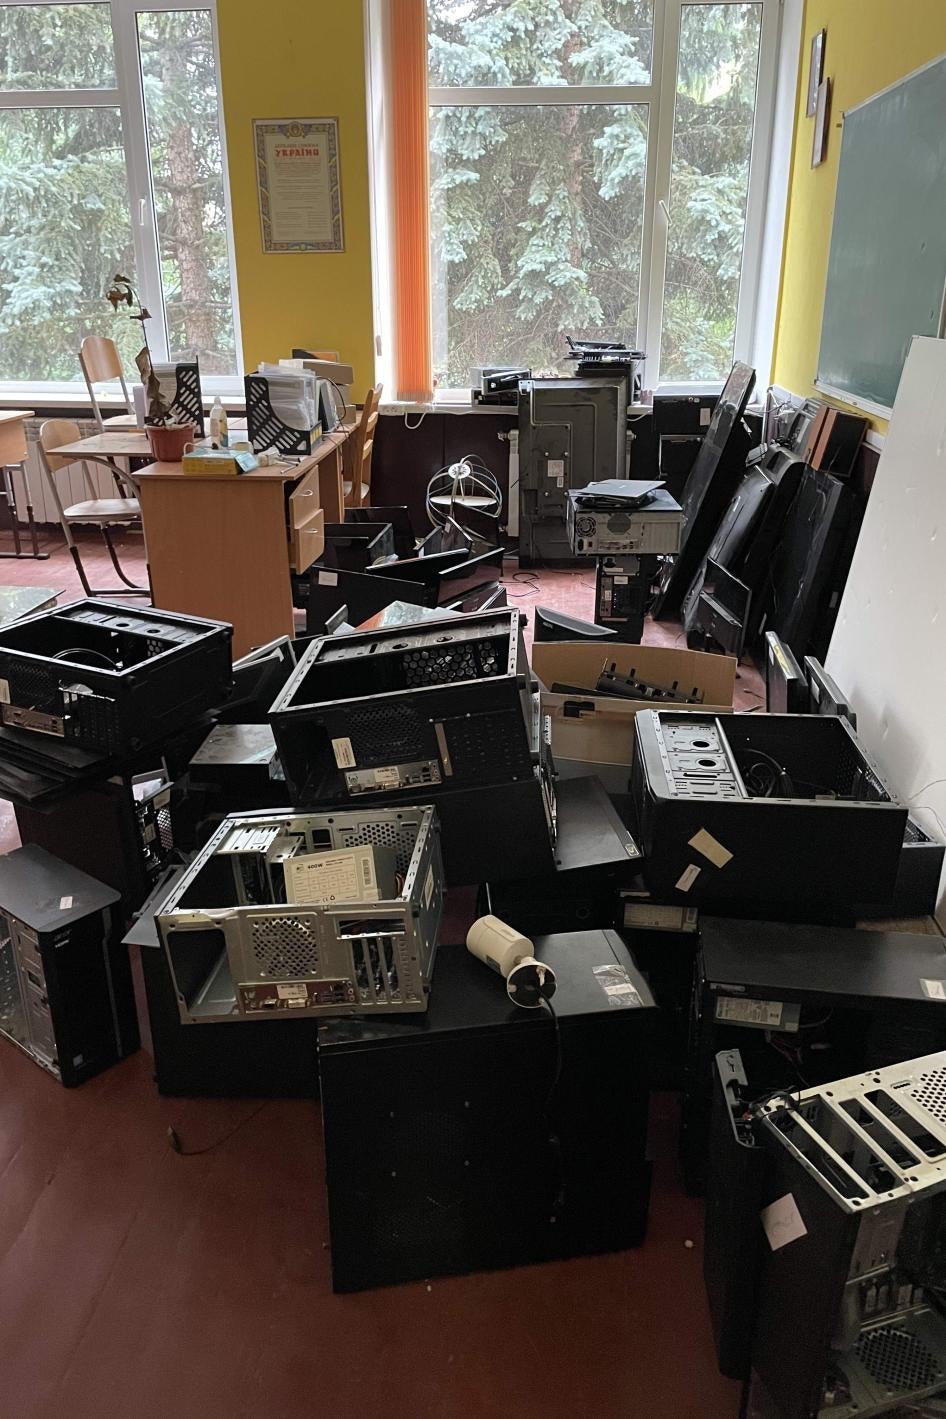 The remains of damaged and looted computers